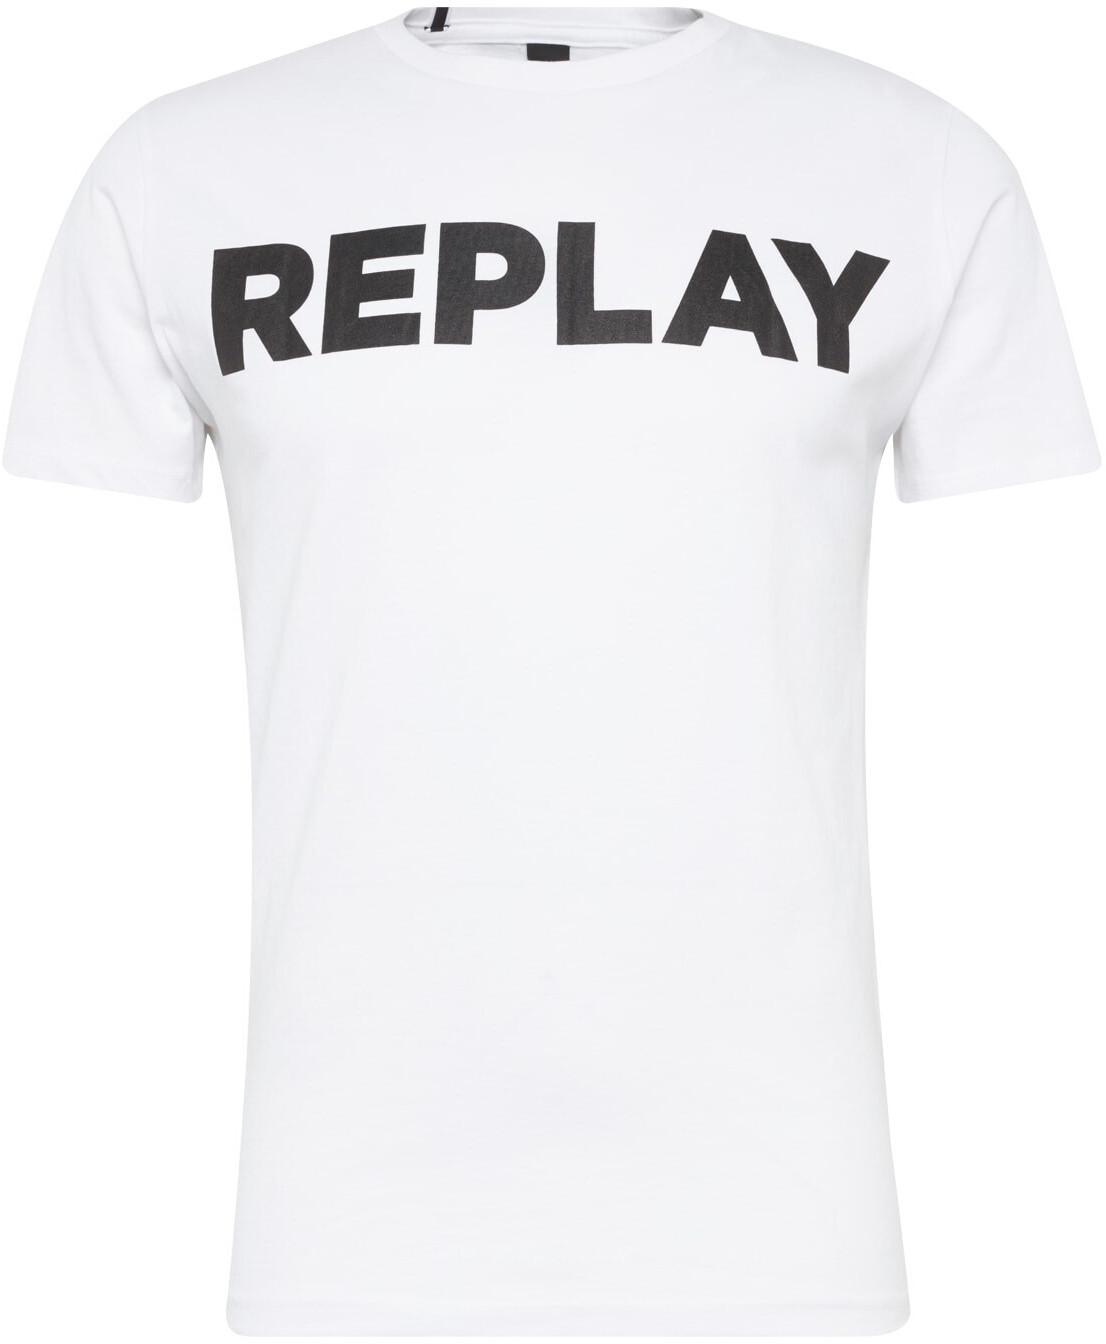 Buy Replay T-Shirt (M3594.000.2660) white from £8.99 (Today) – Best ...